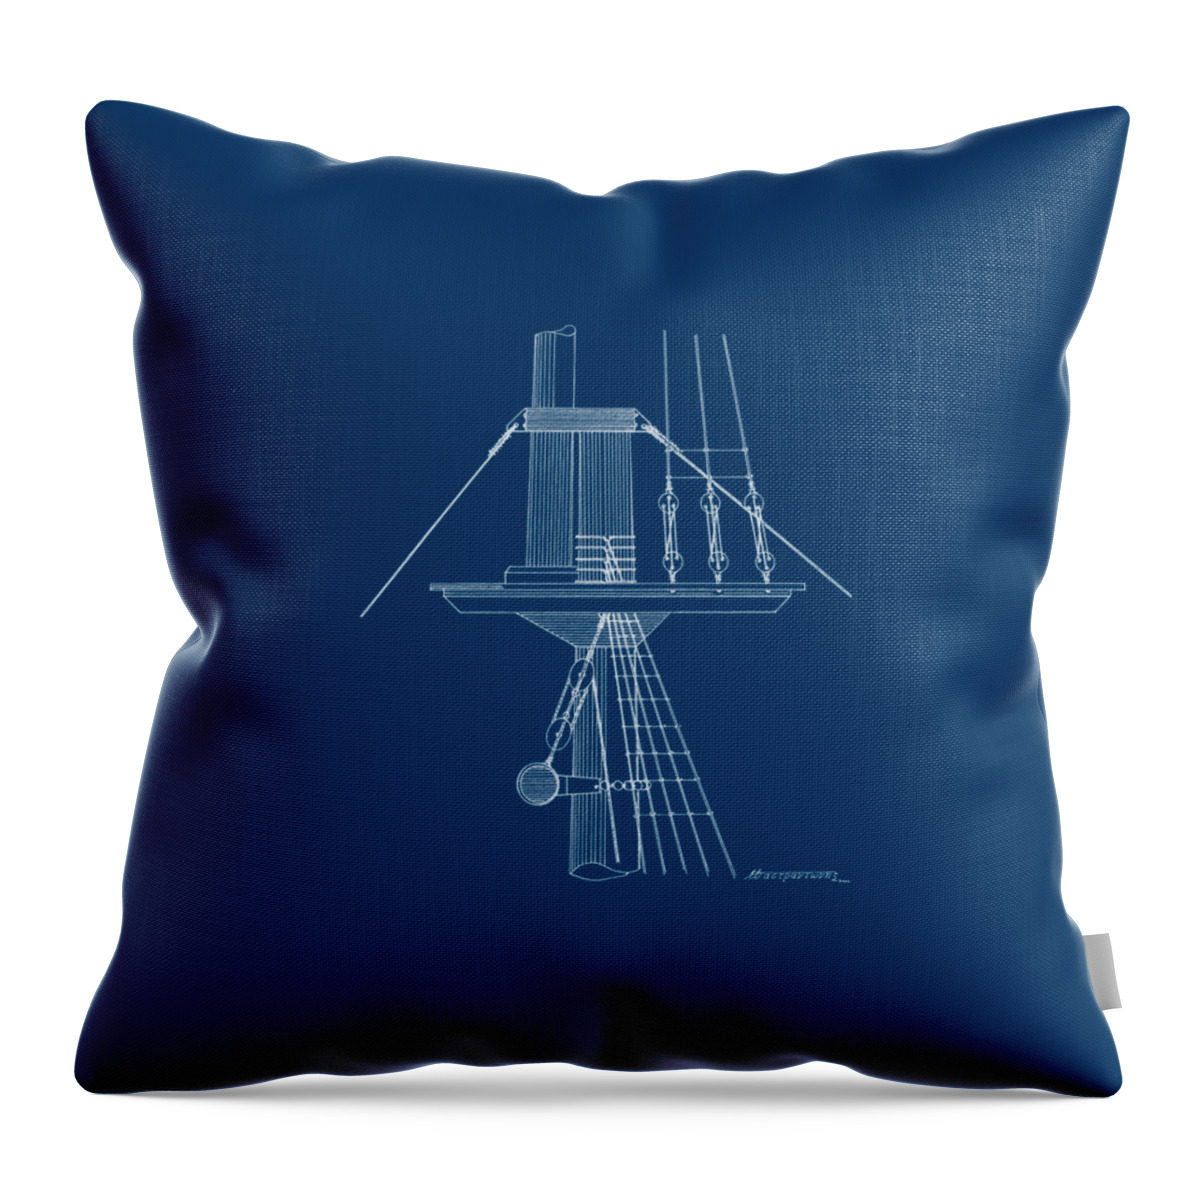 Sailing Vessels Throw Pillow featuring the drawing Sailing ship lookout - crow's nest - blueprint by Panagiotis Mastrantonis